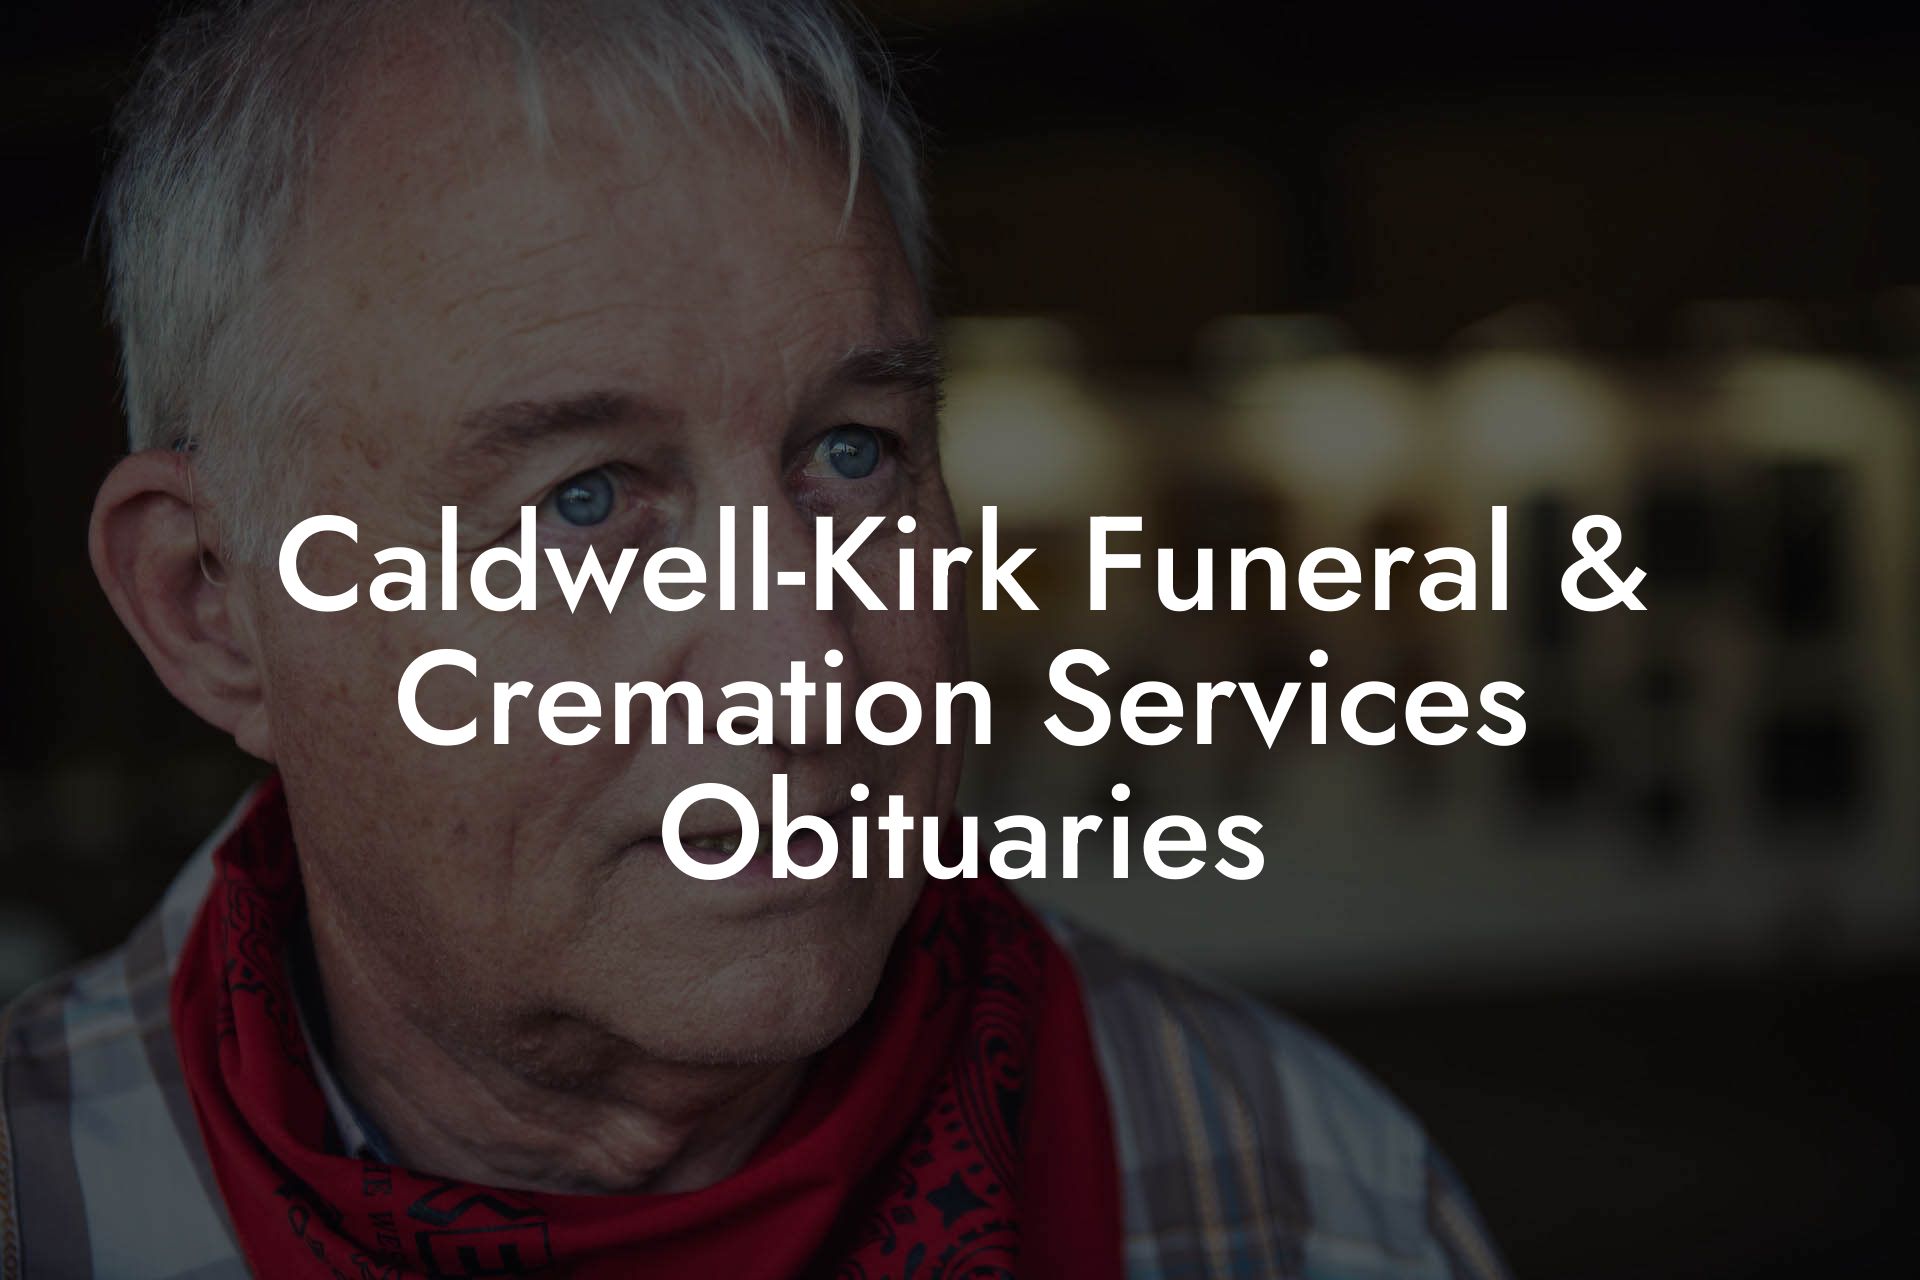 Caldwell-Kirk Funeral & Cremation Services Obituaries